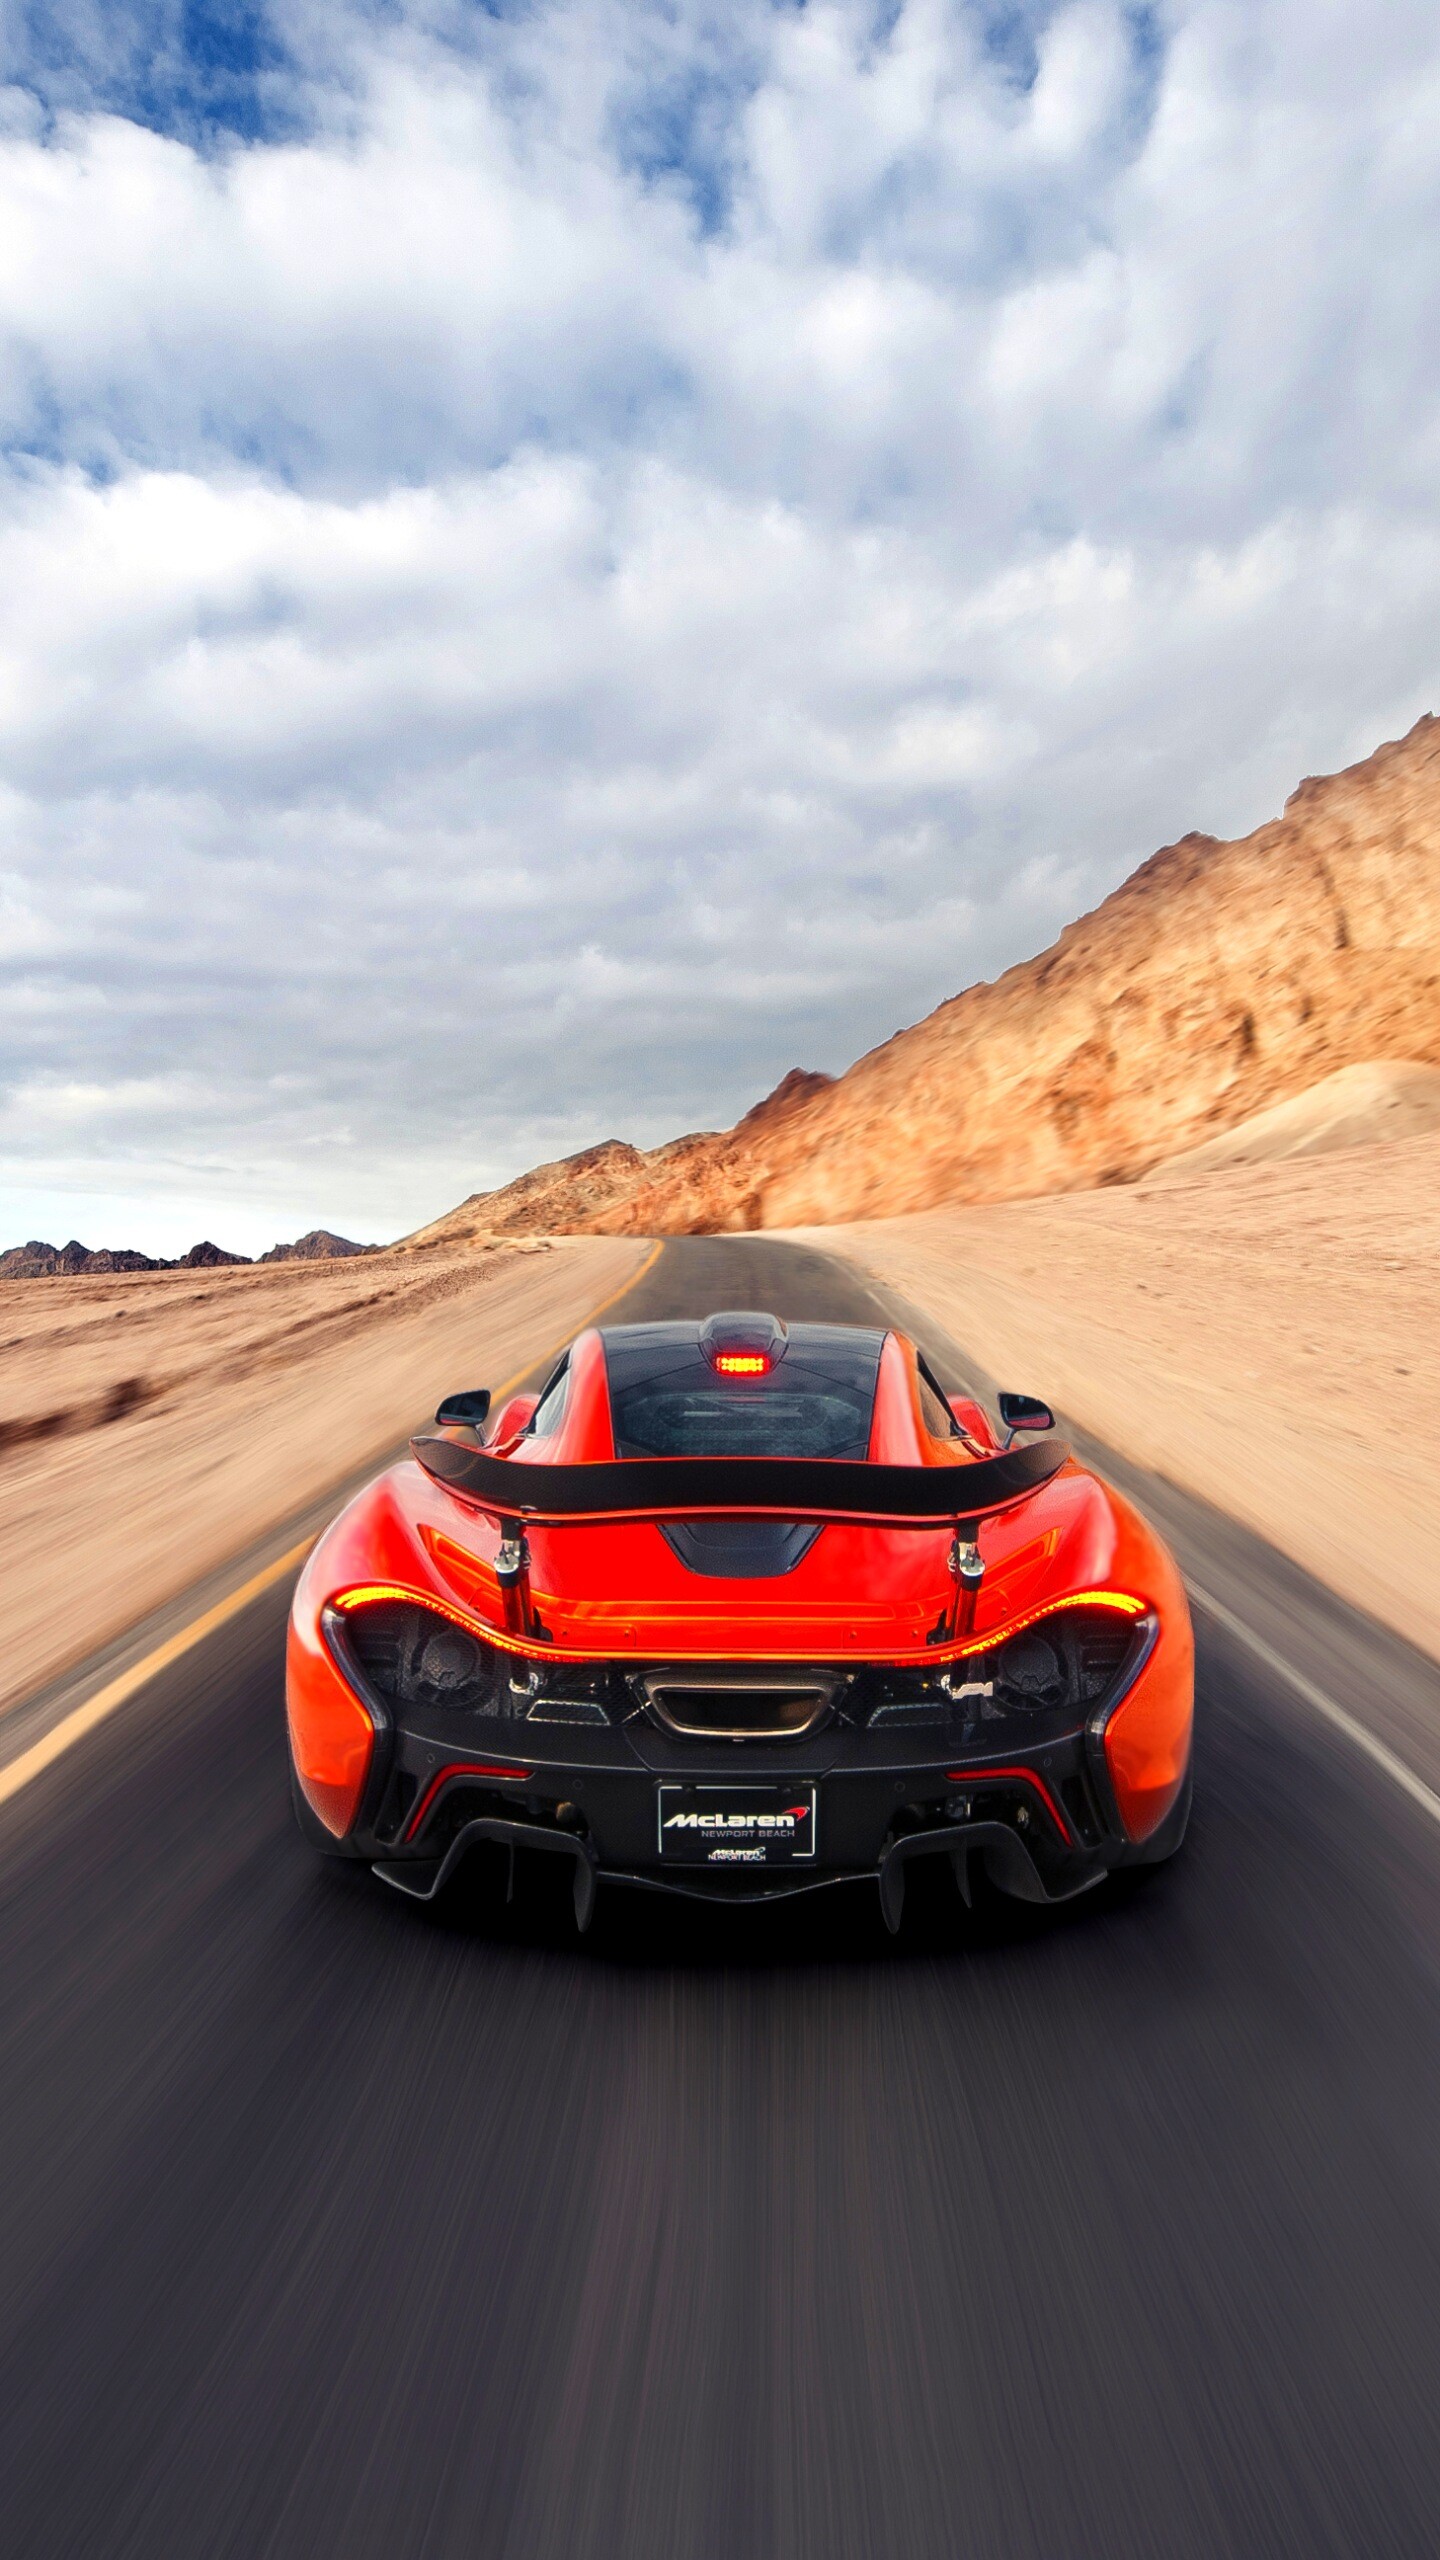 McLaren: A British automaker known for its luxury, high-performance cars, P1. 1440x2560 HD Wallpaper.